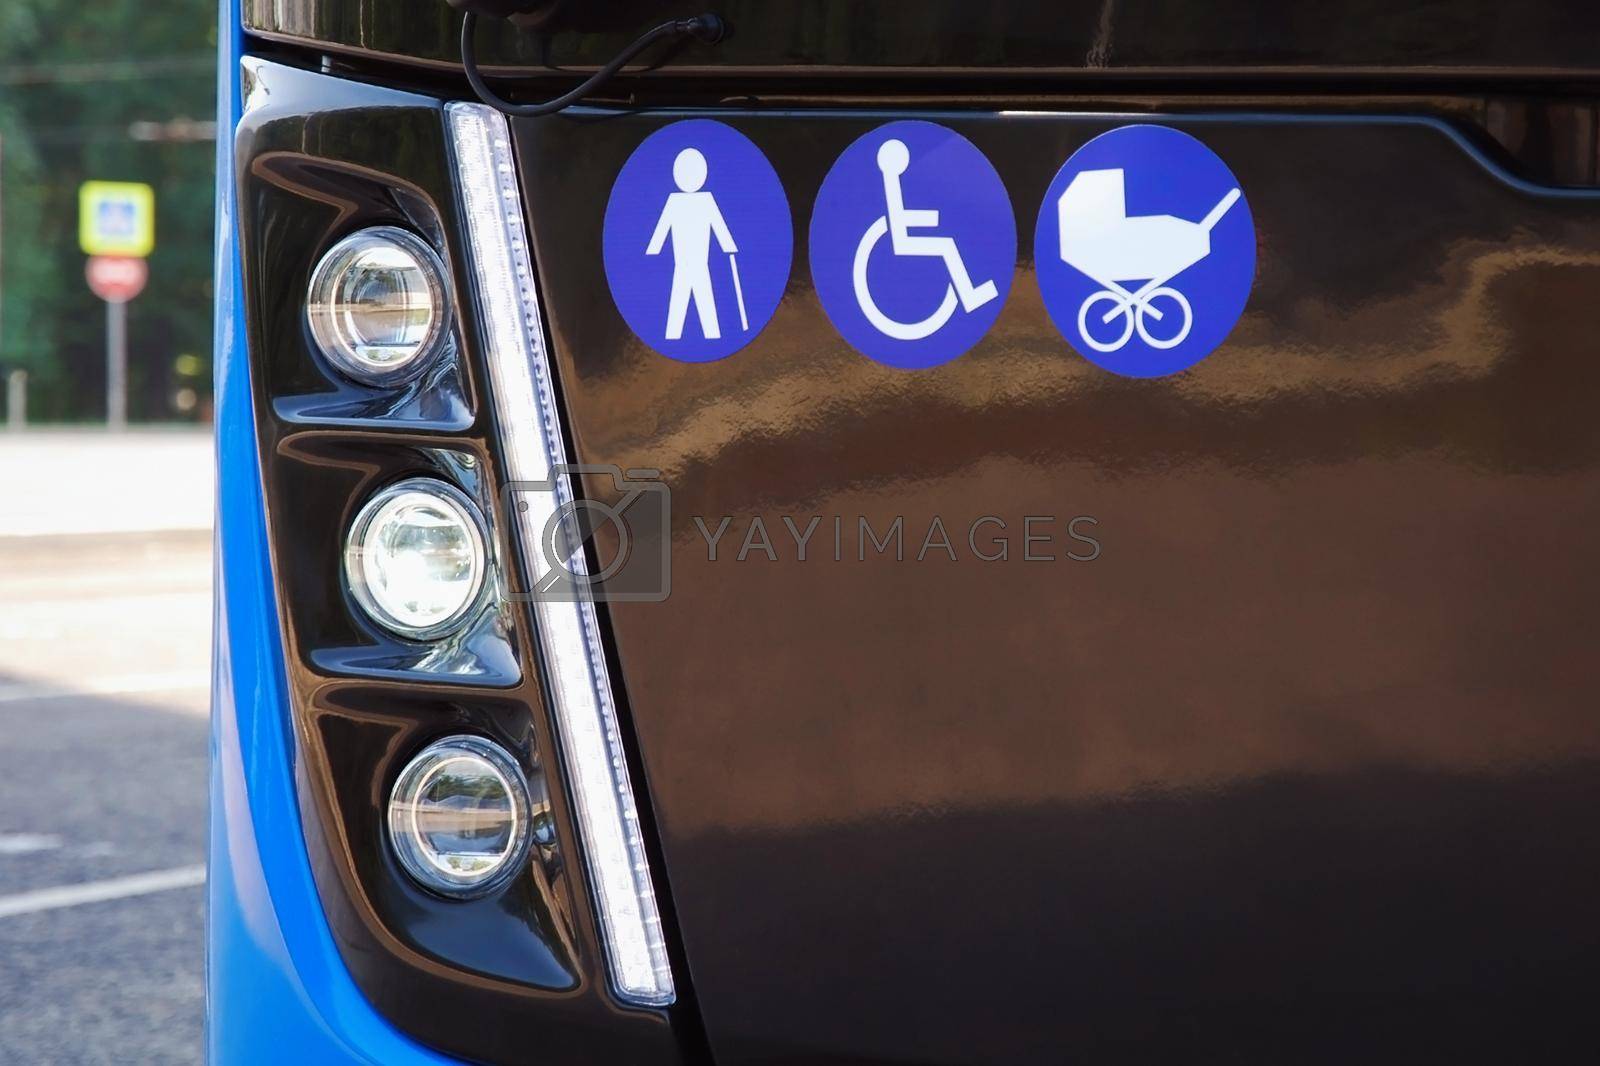 Signs of elderly, disabled person and baby carriage on city bus - public transport accessible for seniors and people with disabilities and children